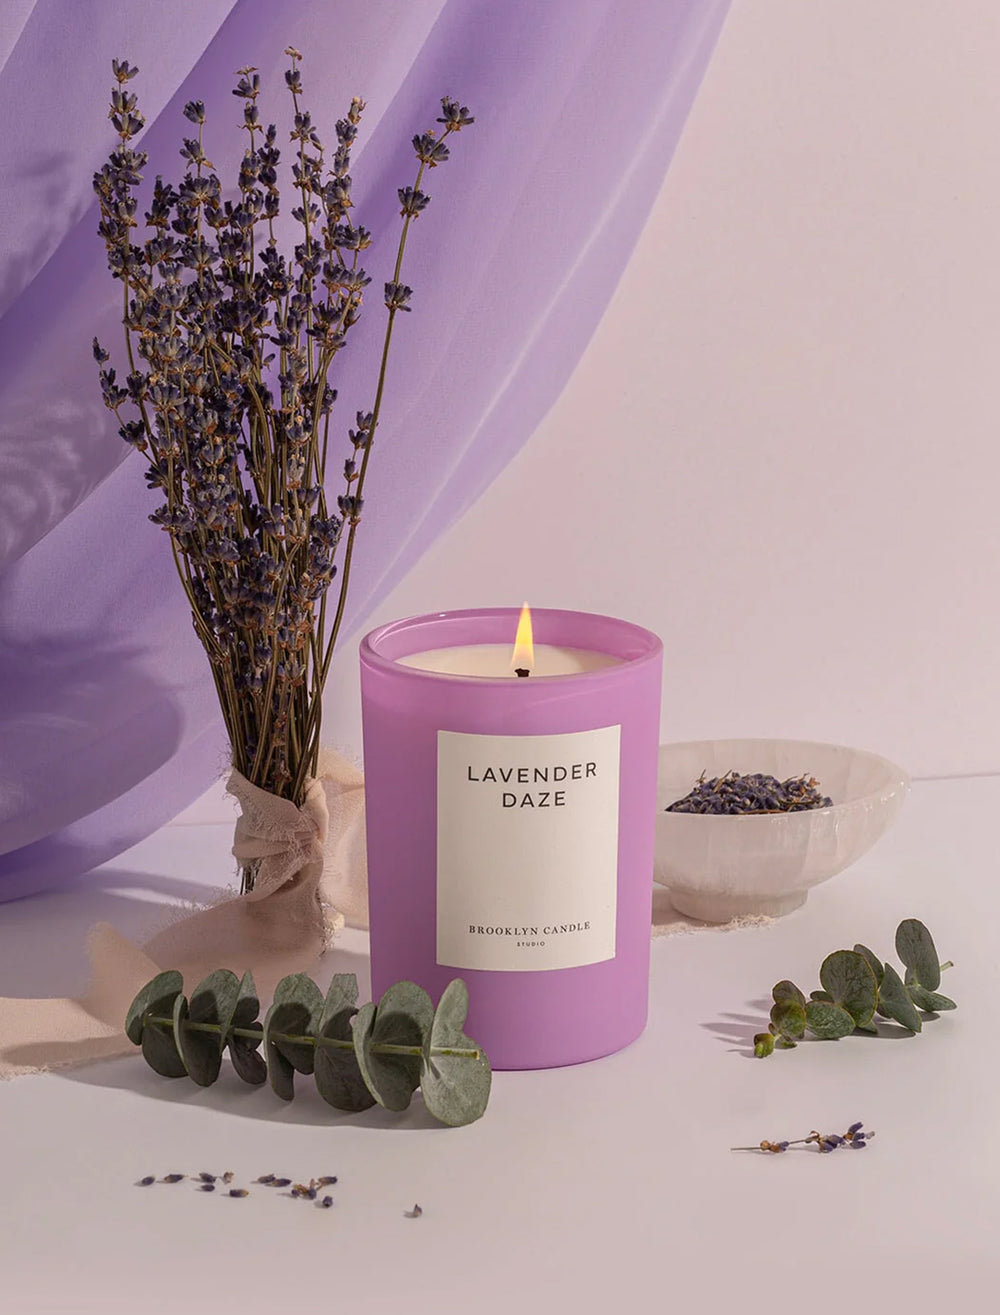 Stylized photo of Brooklyn Candle Studio's lavender daze candle.